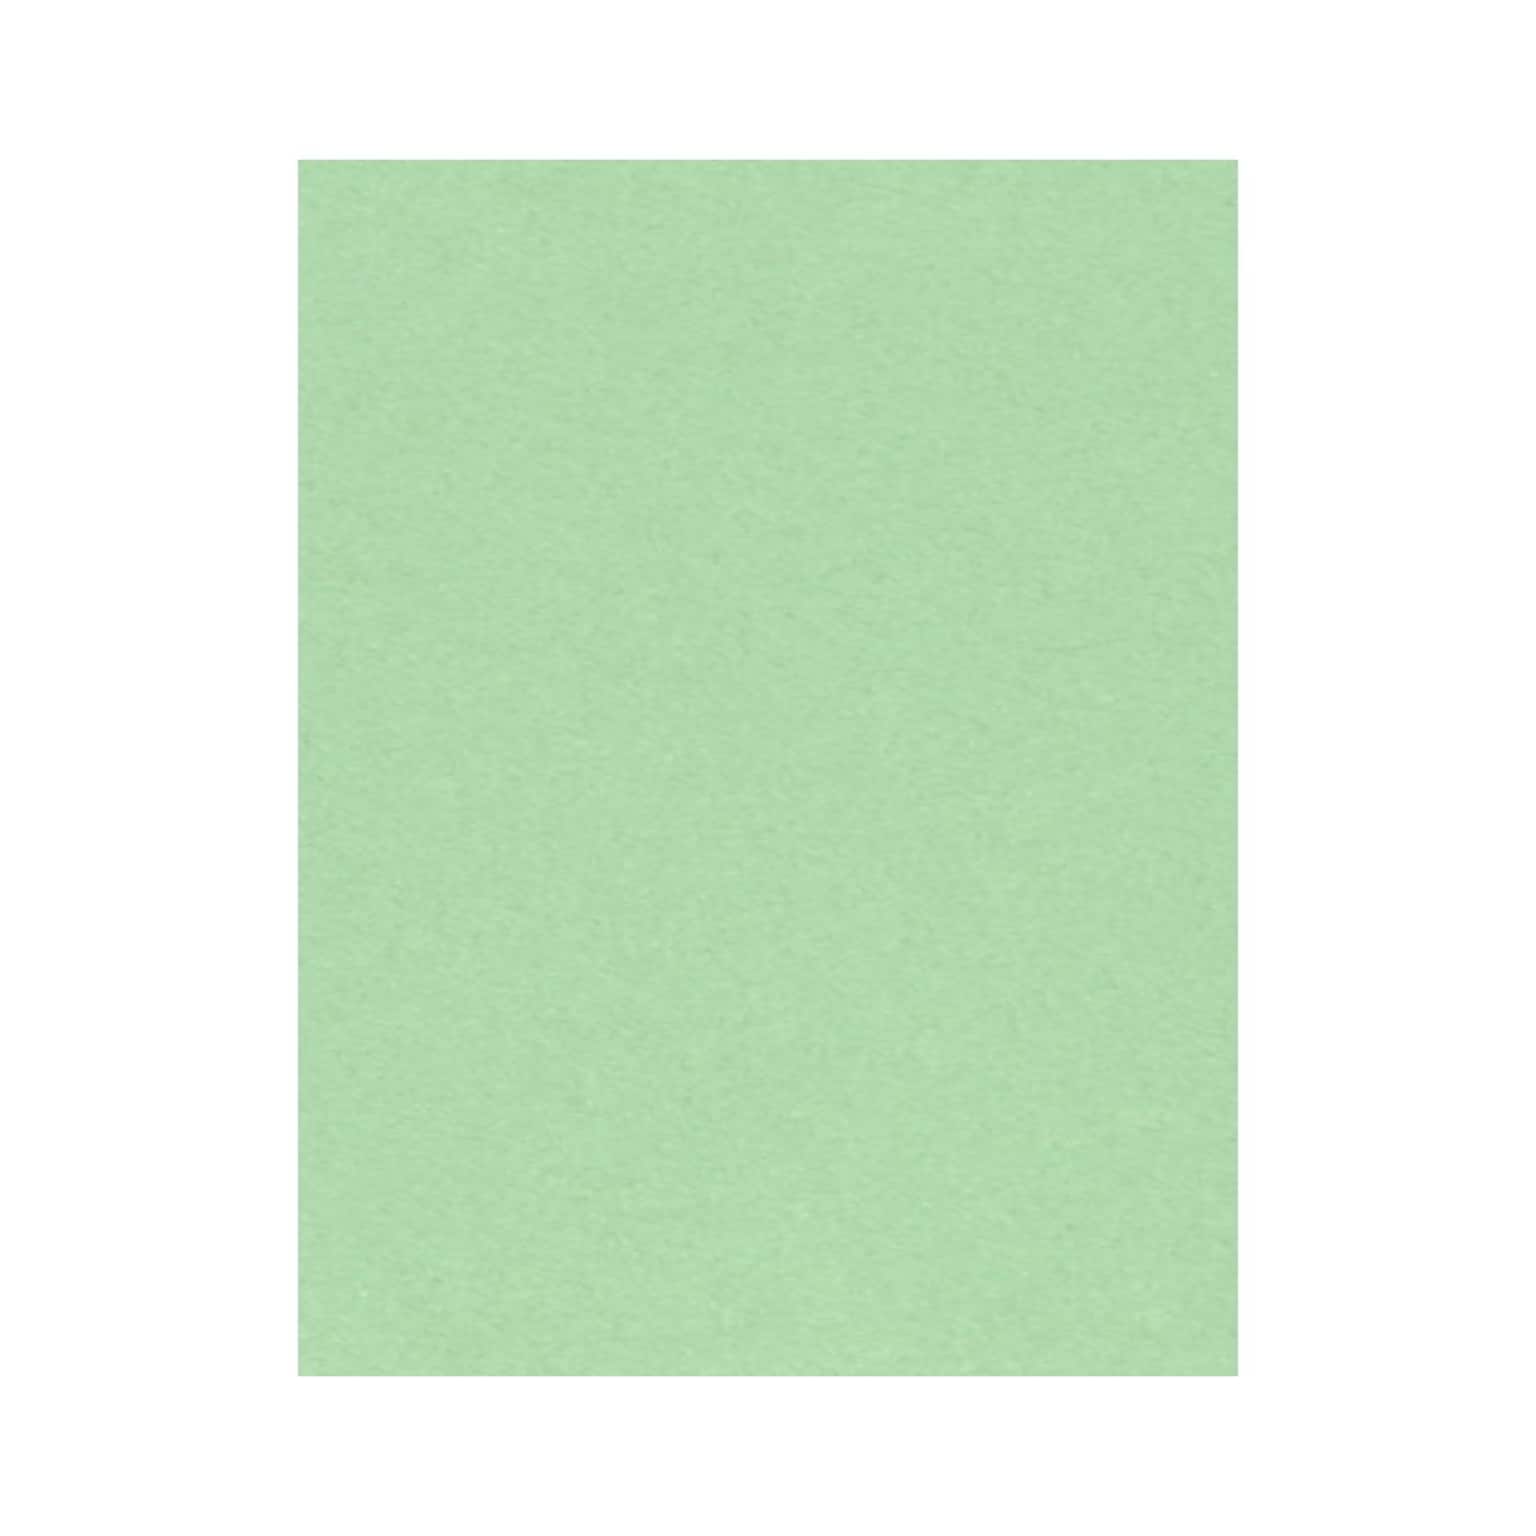 LUX 65 lb. Cardstock Paper, 8.5 x 11, Pastel Green, 250 Sheets/Pack (81211-C-67-250)